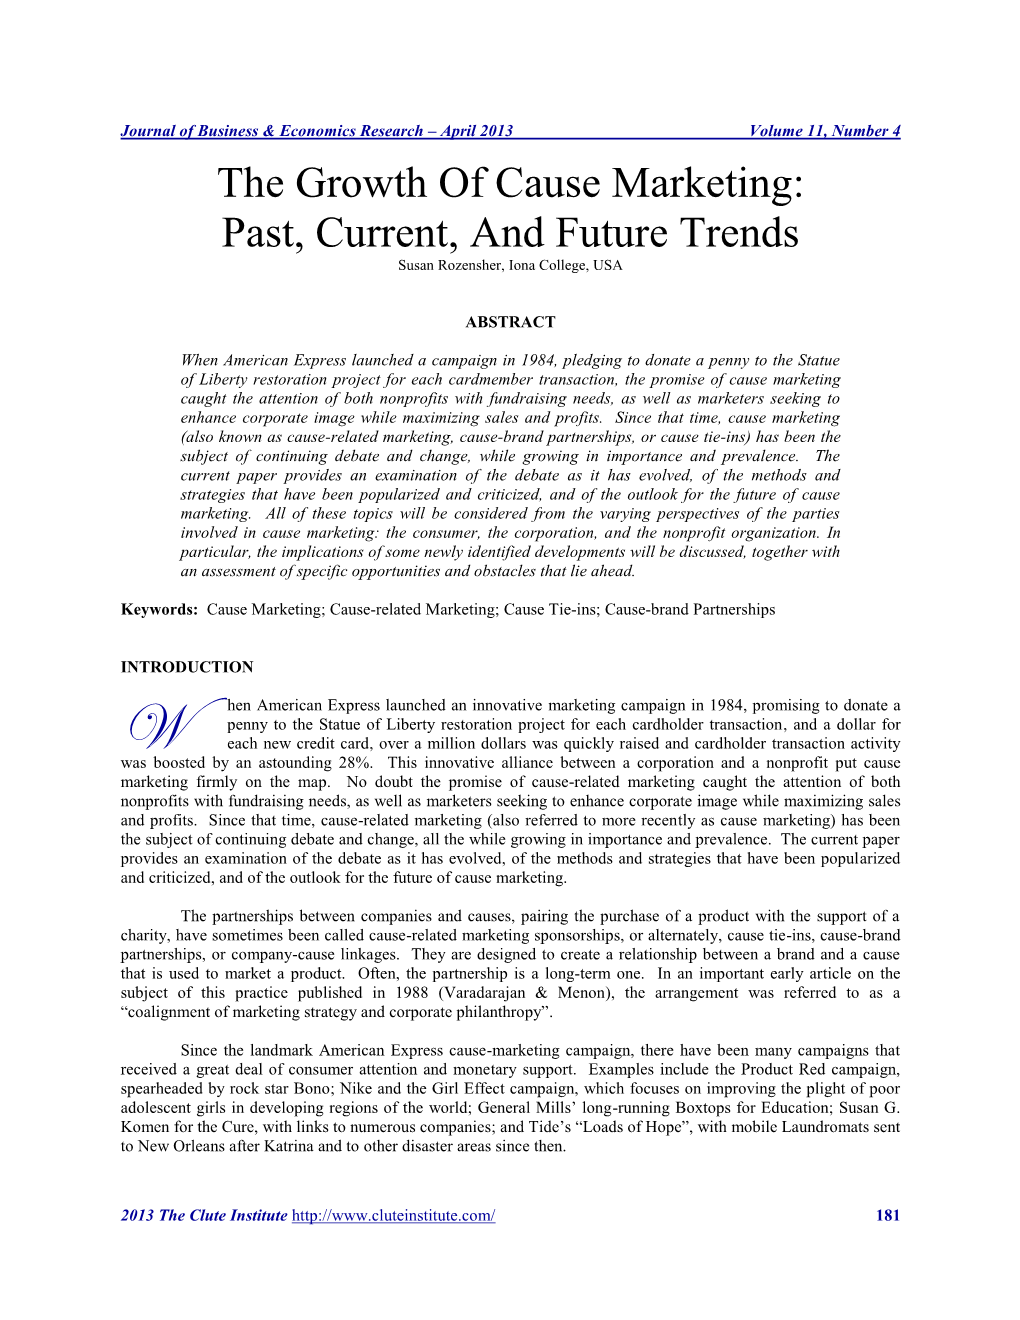 The Growth of Cause Marketing: Past, Current, and Future Trends Susan Rozensher, Iona College, USA